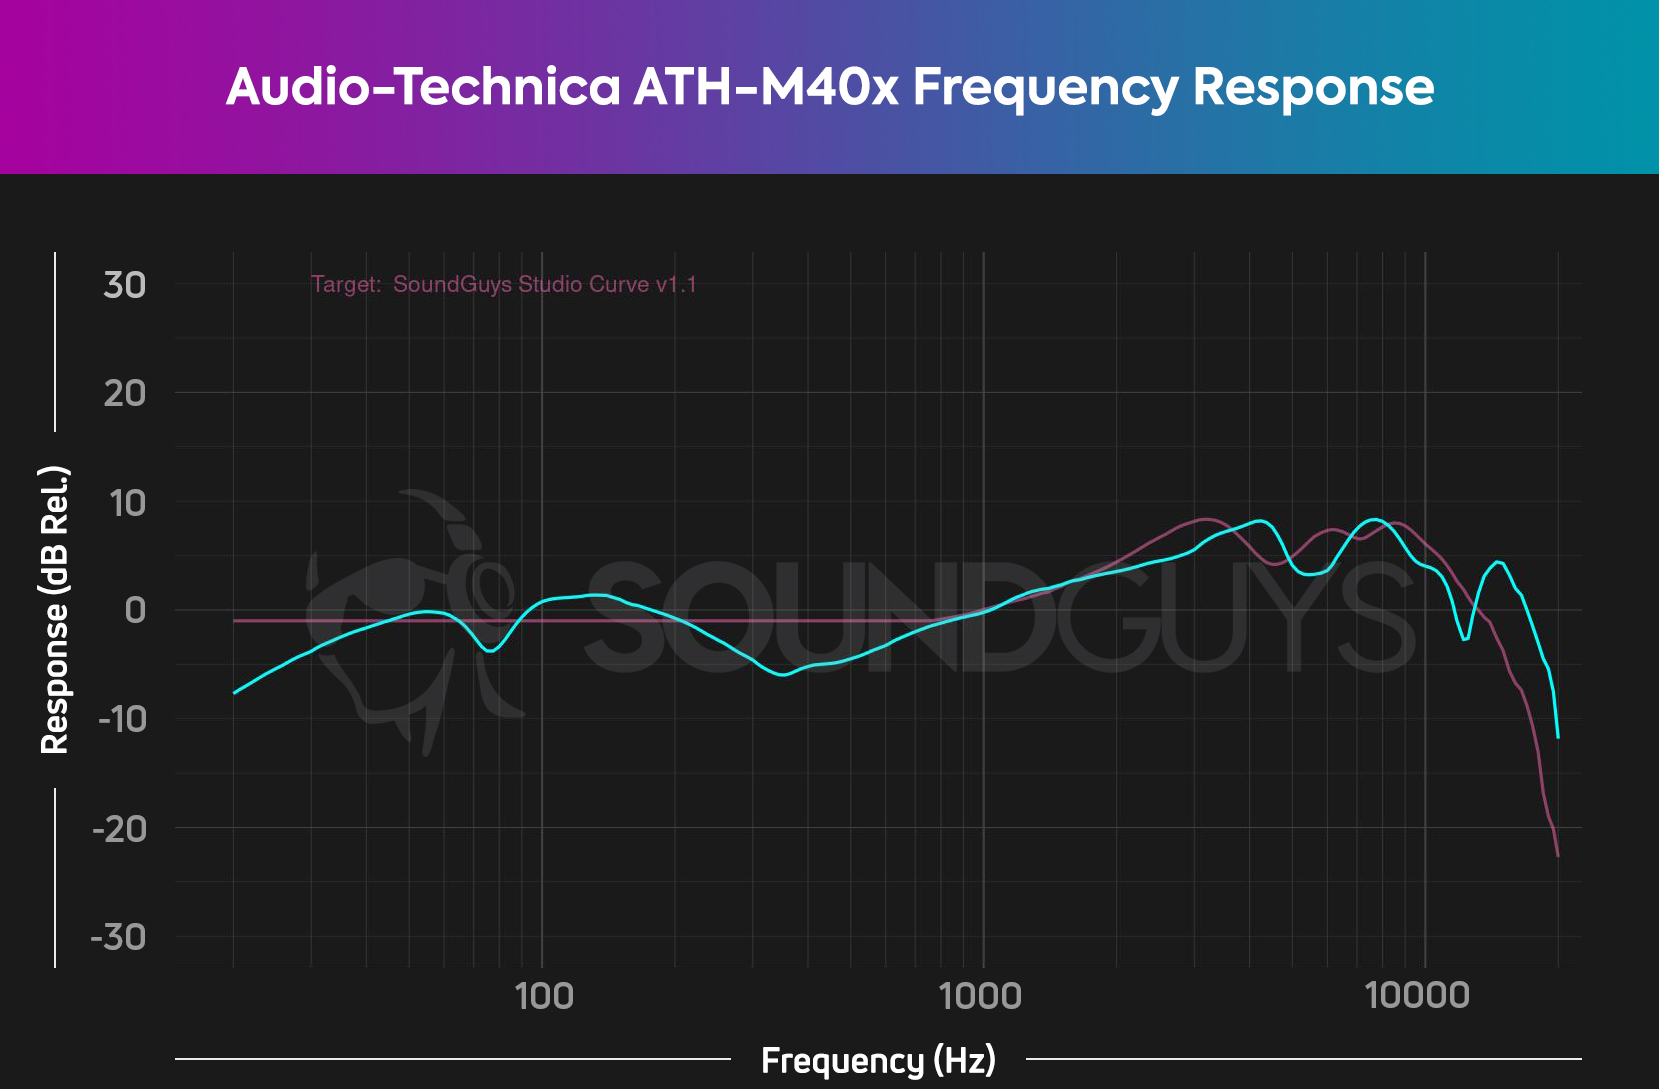 A frequency response chart depicts the A comparison frequency response chart with the Audio-Technica ATH-M40x (cyan) response over the SoundGuys Consumer Curve v2.0 (pink), with the headphones closely following our curve's treble response.